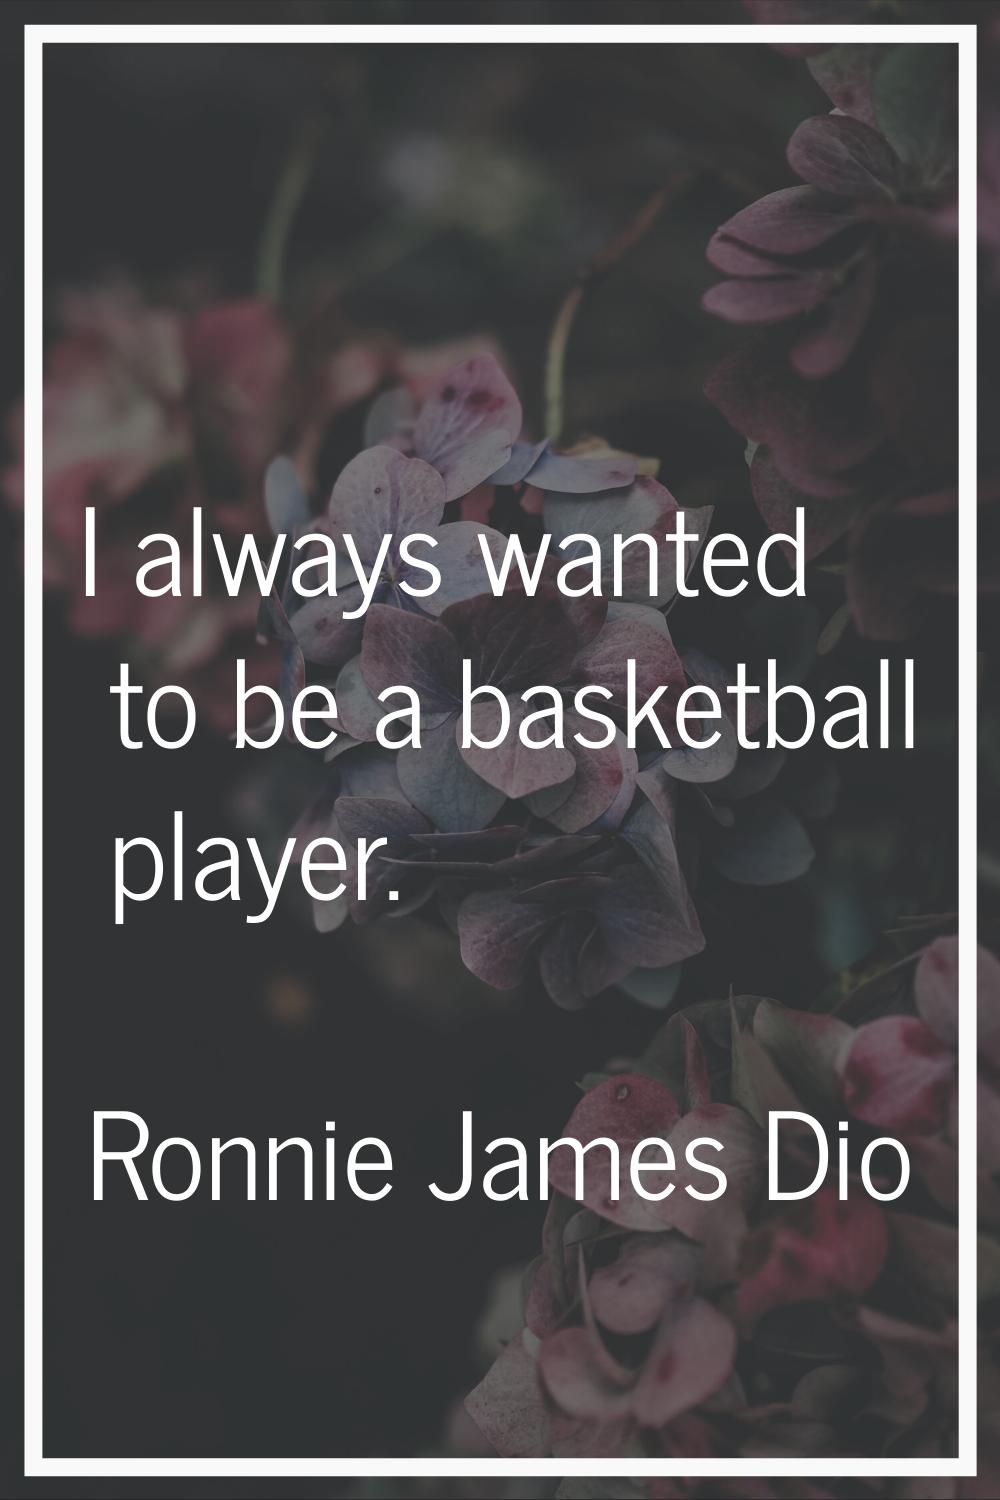 I always wanted to be a basketball player.